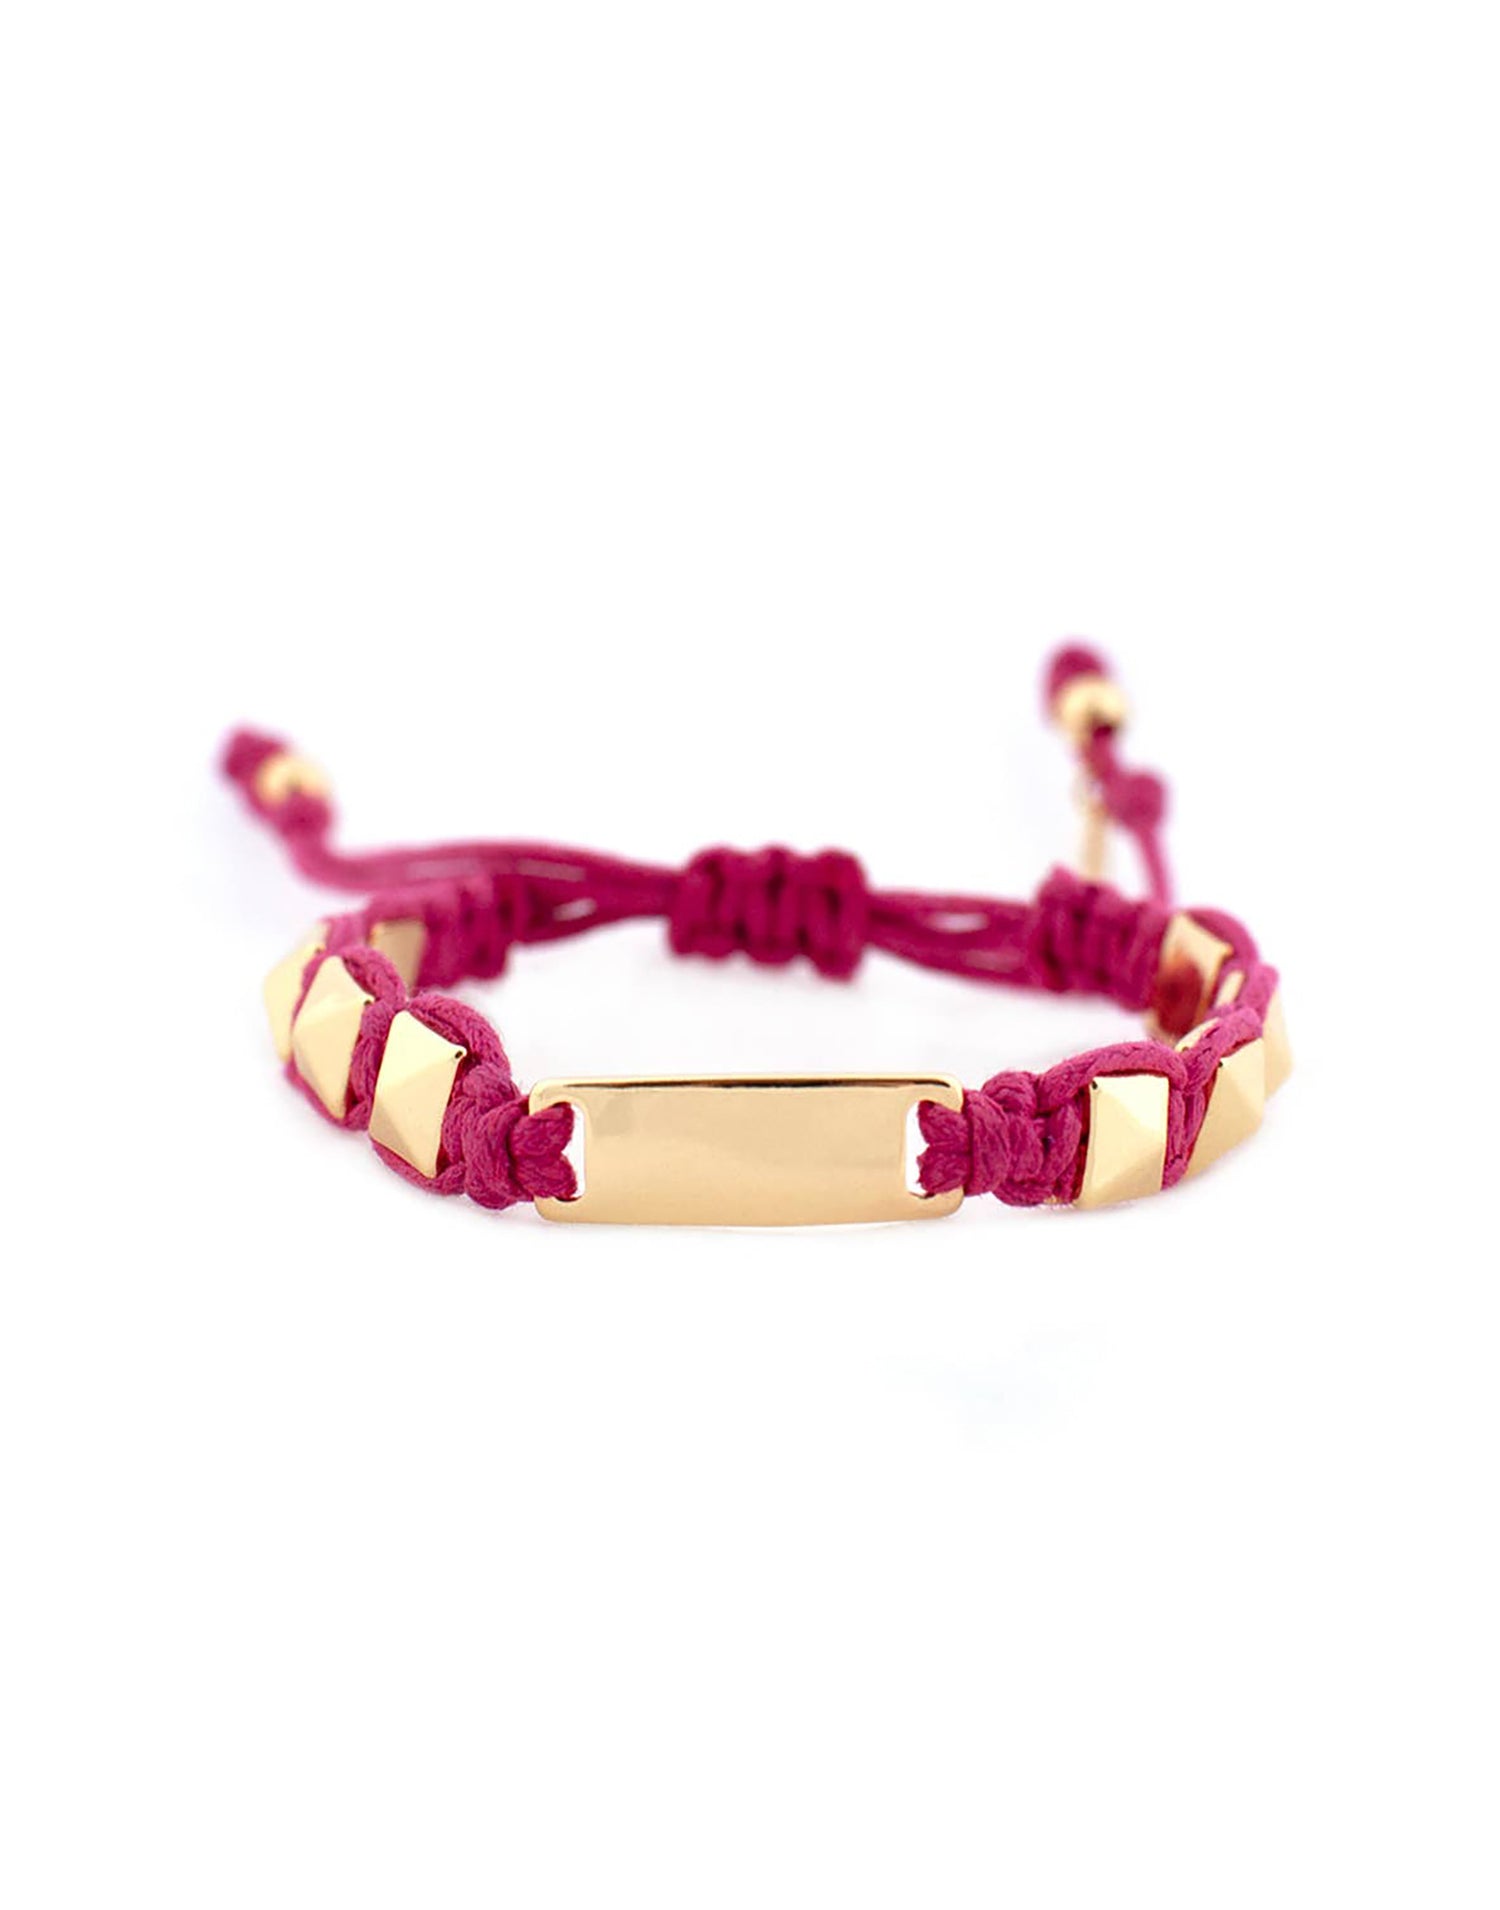 Pull Tie Bracelet by Marlyn Schiff in Gold/Fuchsia - Product View